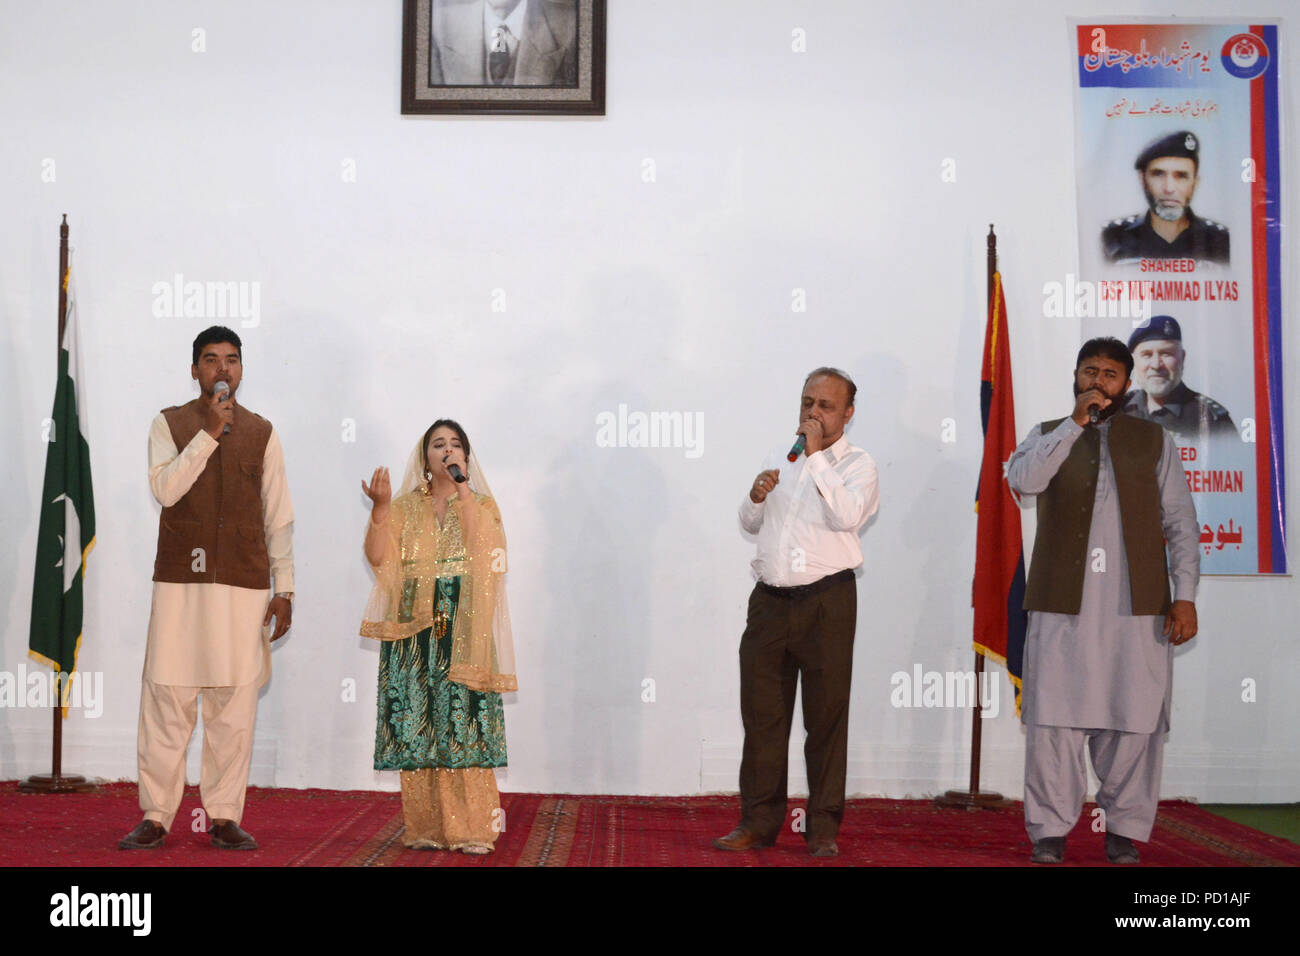 Quetta, Pakistan. August 04 2018: Pakistani singers Urooj Fatima and others performing national song on the stage during an event regarding National police day at police line in Quetta. Stock Photo